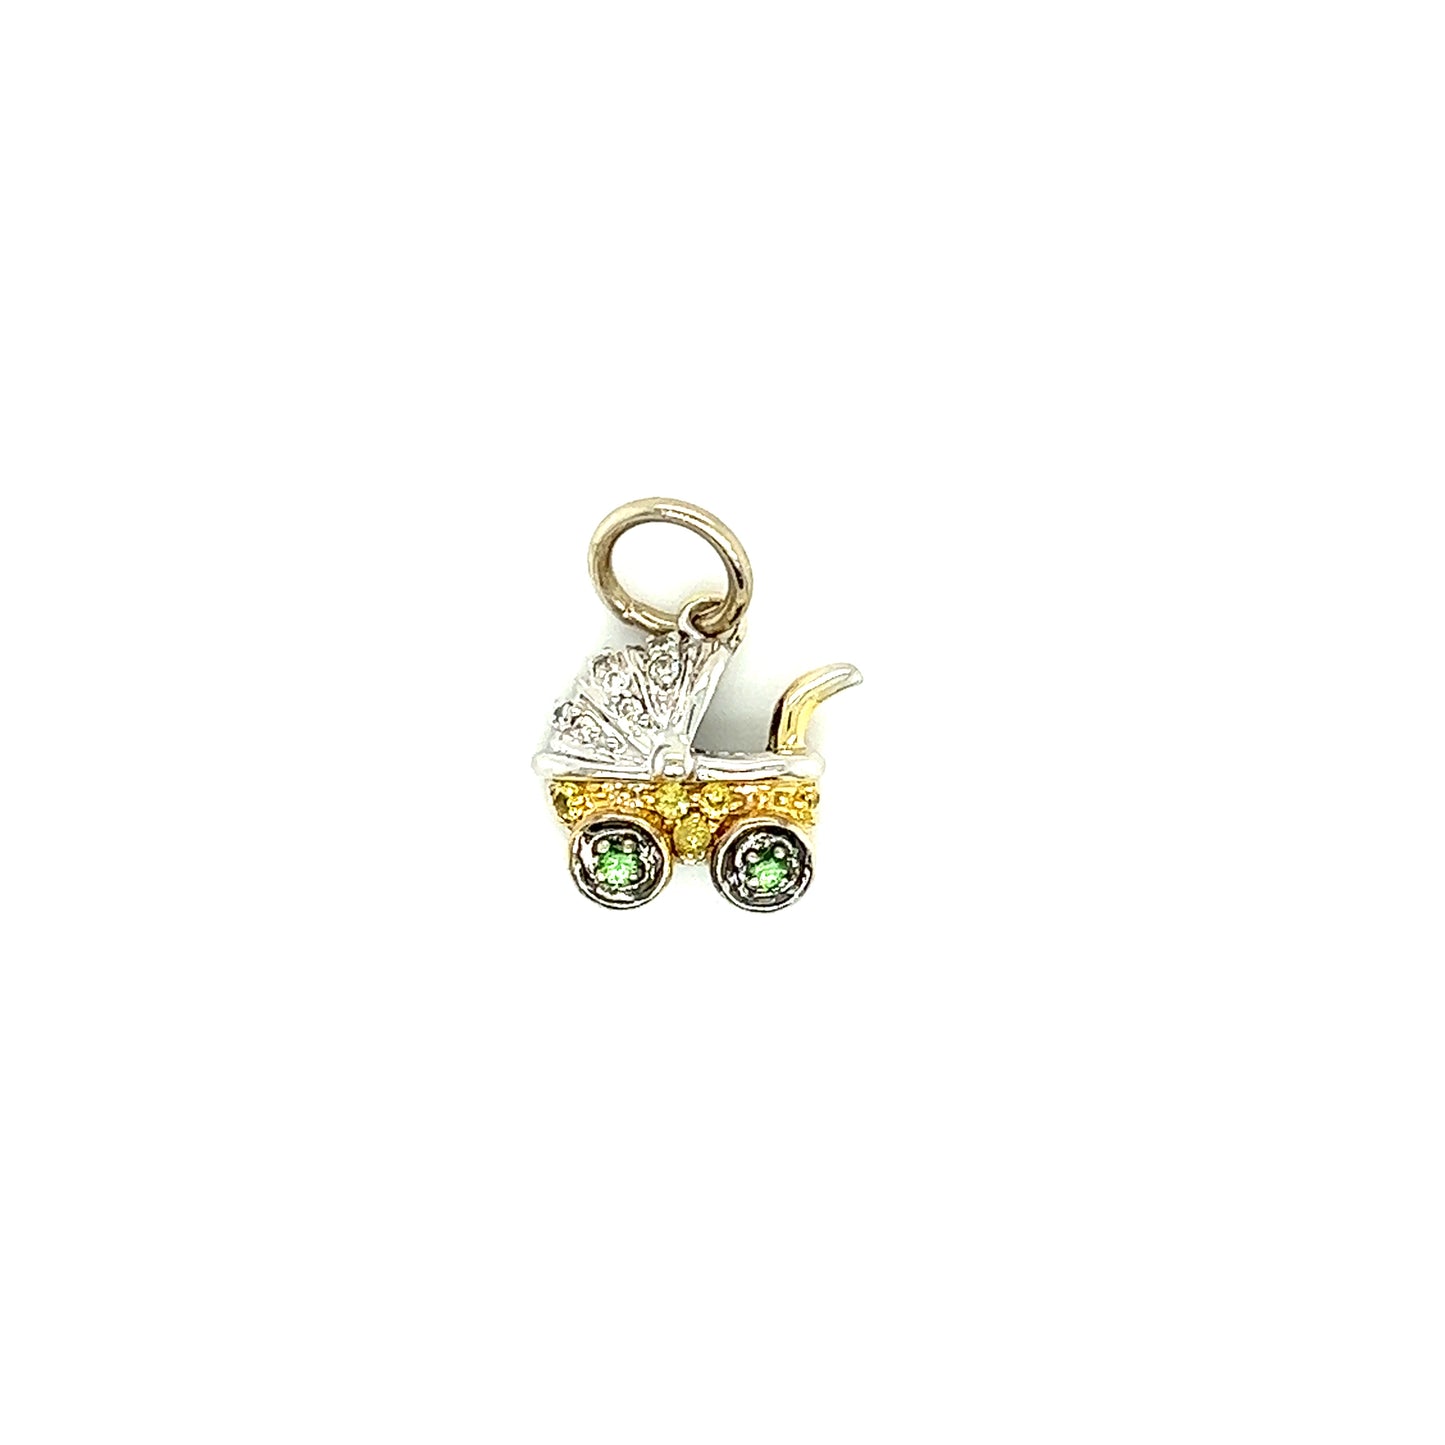 Stroller Charm with Diamonds and Sapphire Accents in 14K Yellow and White Gold